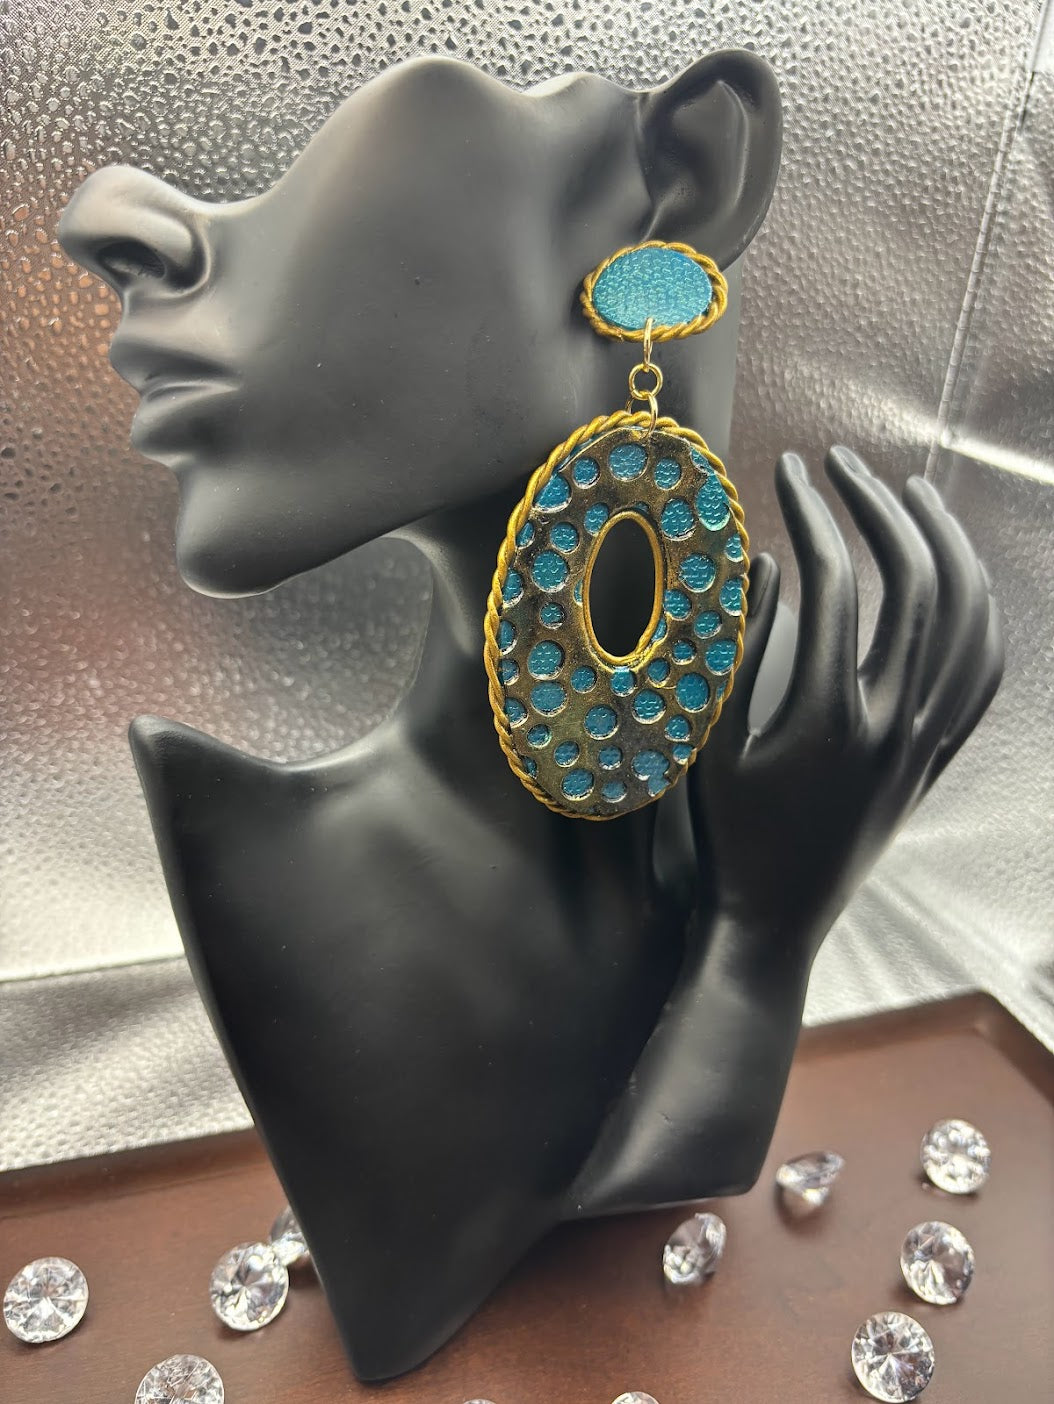 Polymer Clay Earrings - Turquoise & Gold Lace Oval Hoops